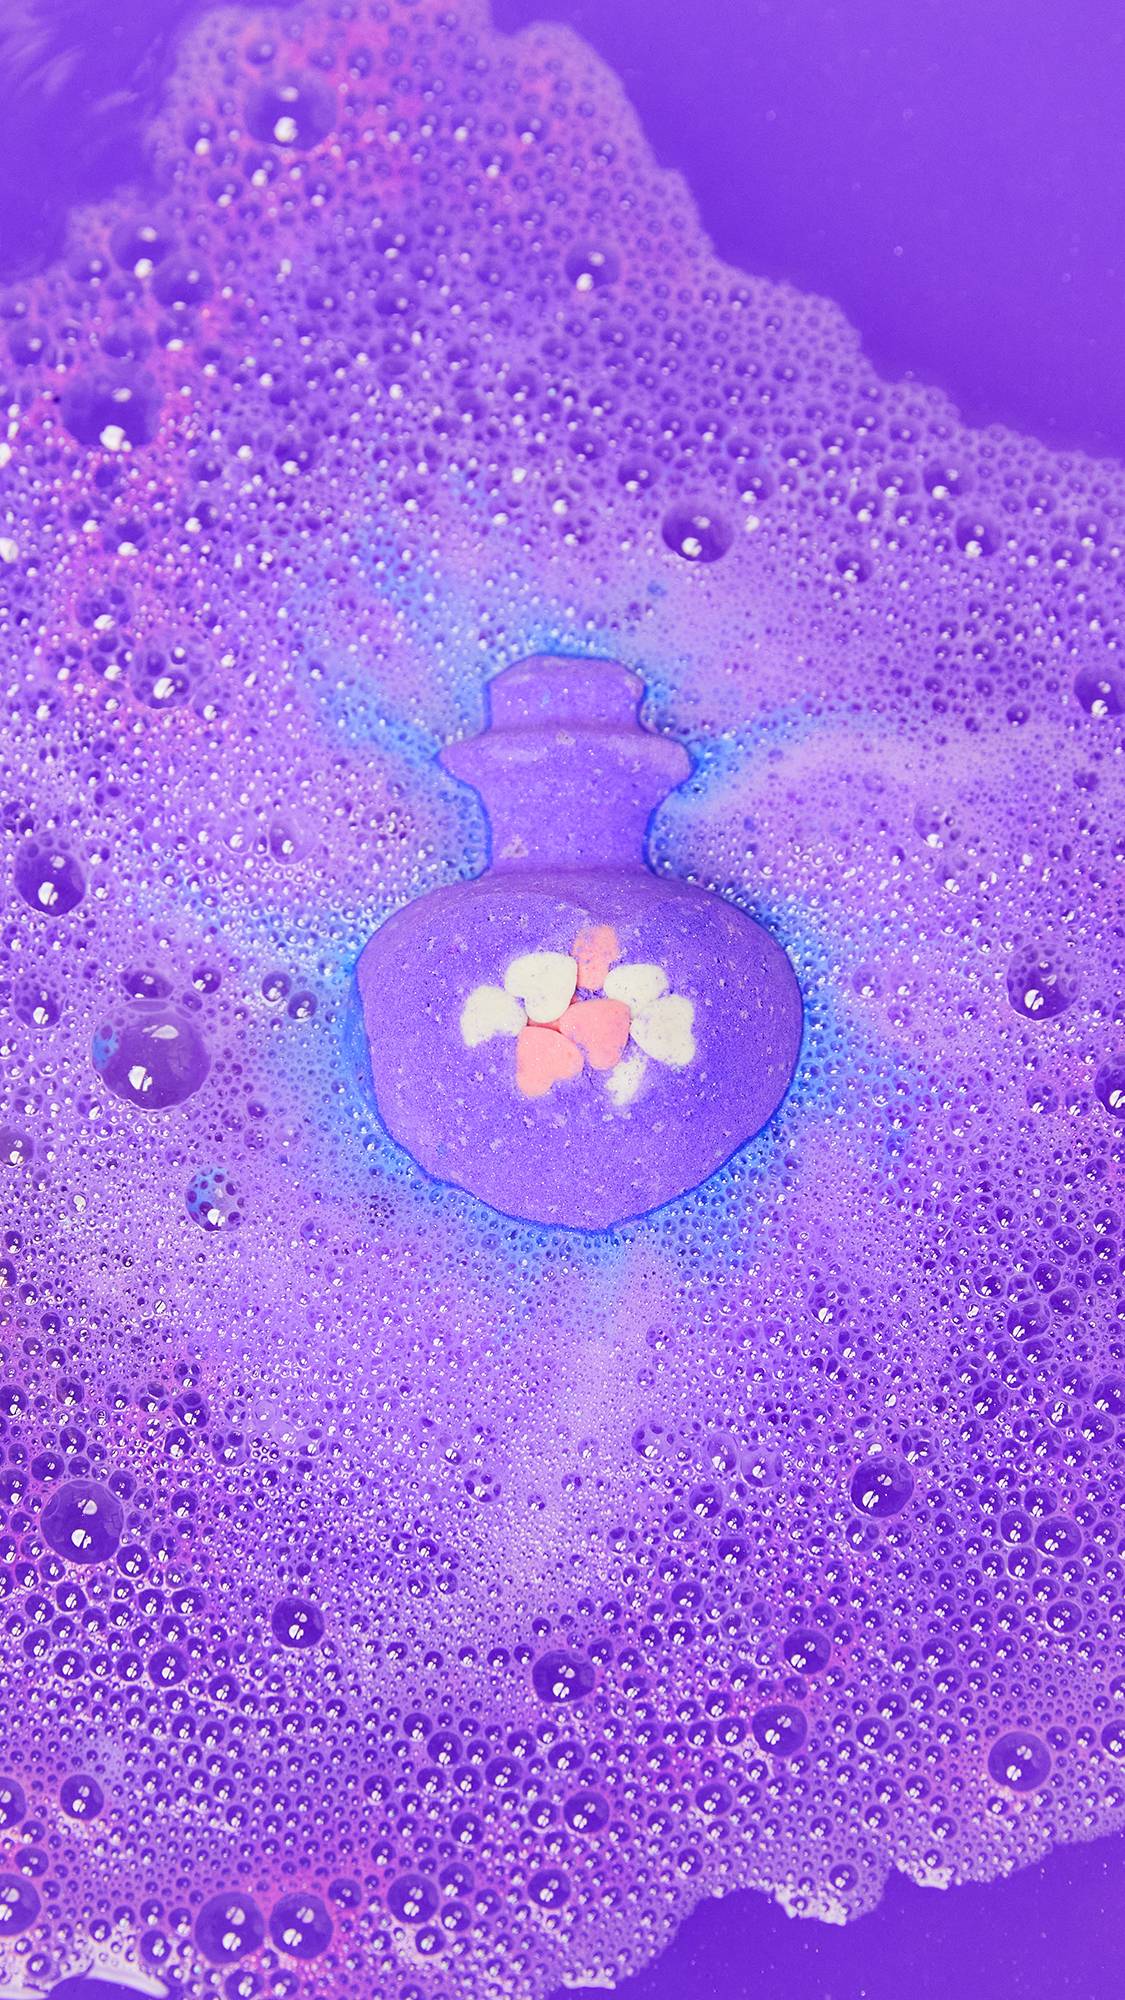 Love Potion bath bomb sits in the middle of the water, the pale pink and white heart confetti just visible, surrounded by deep purple.